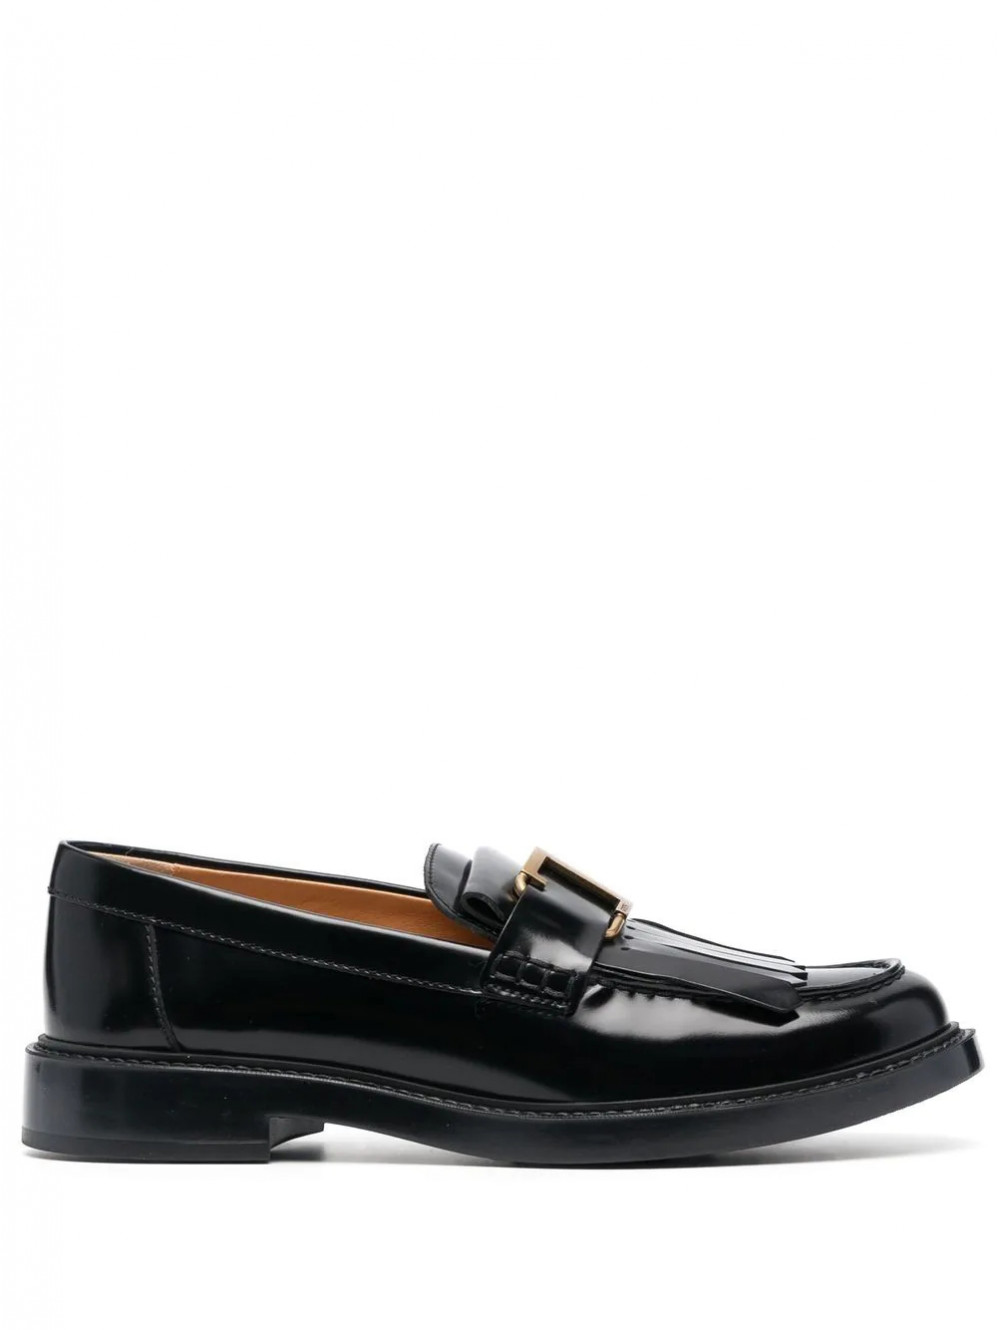 Gomma basso 59c loafers